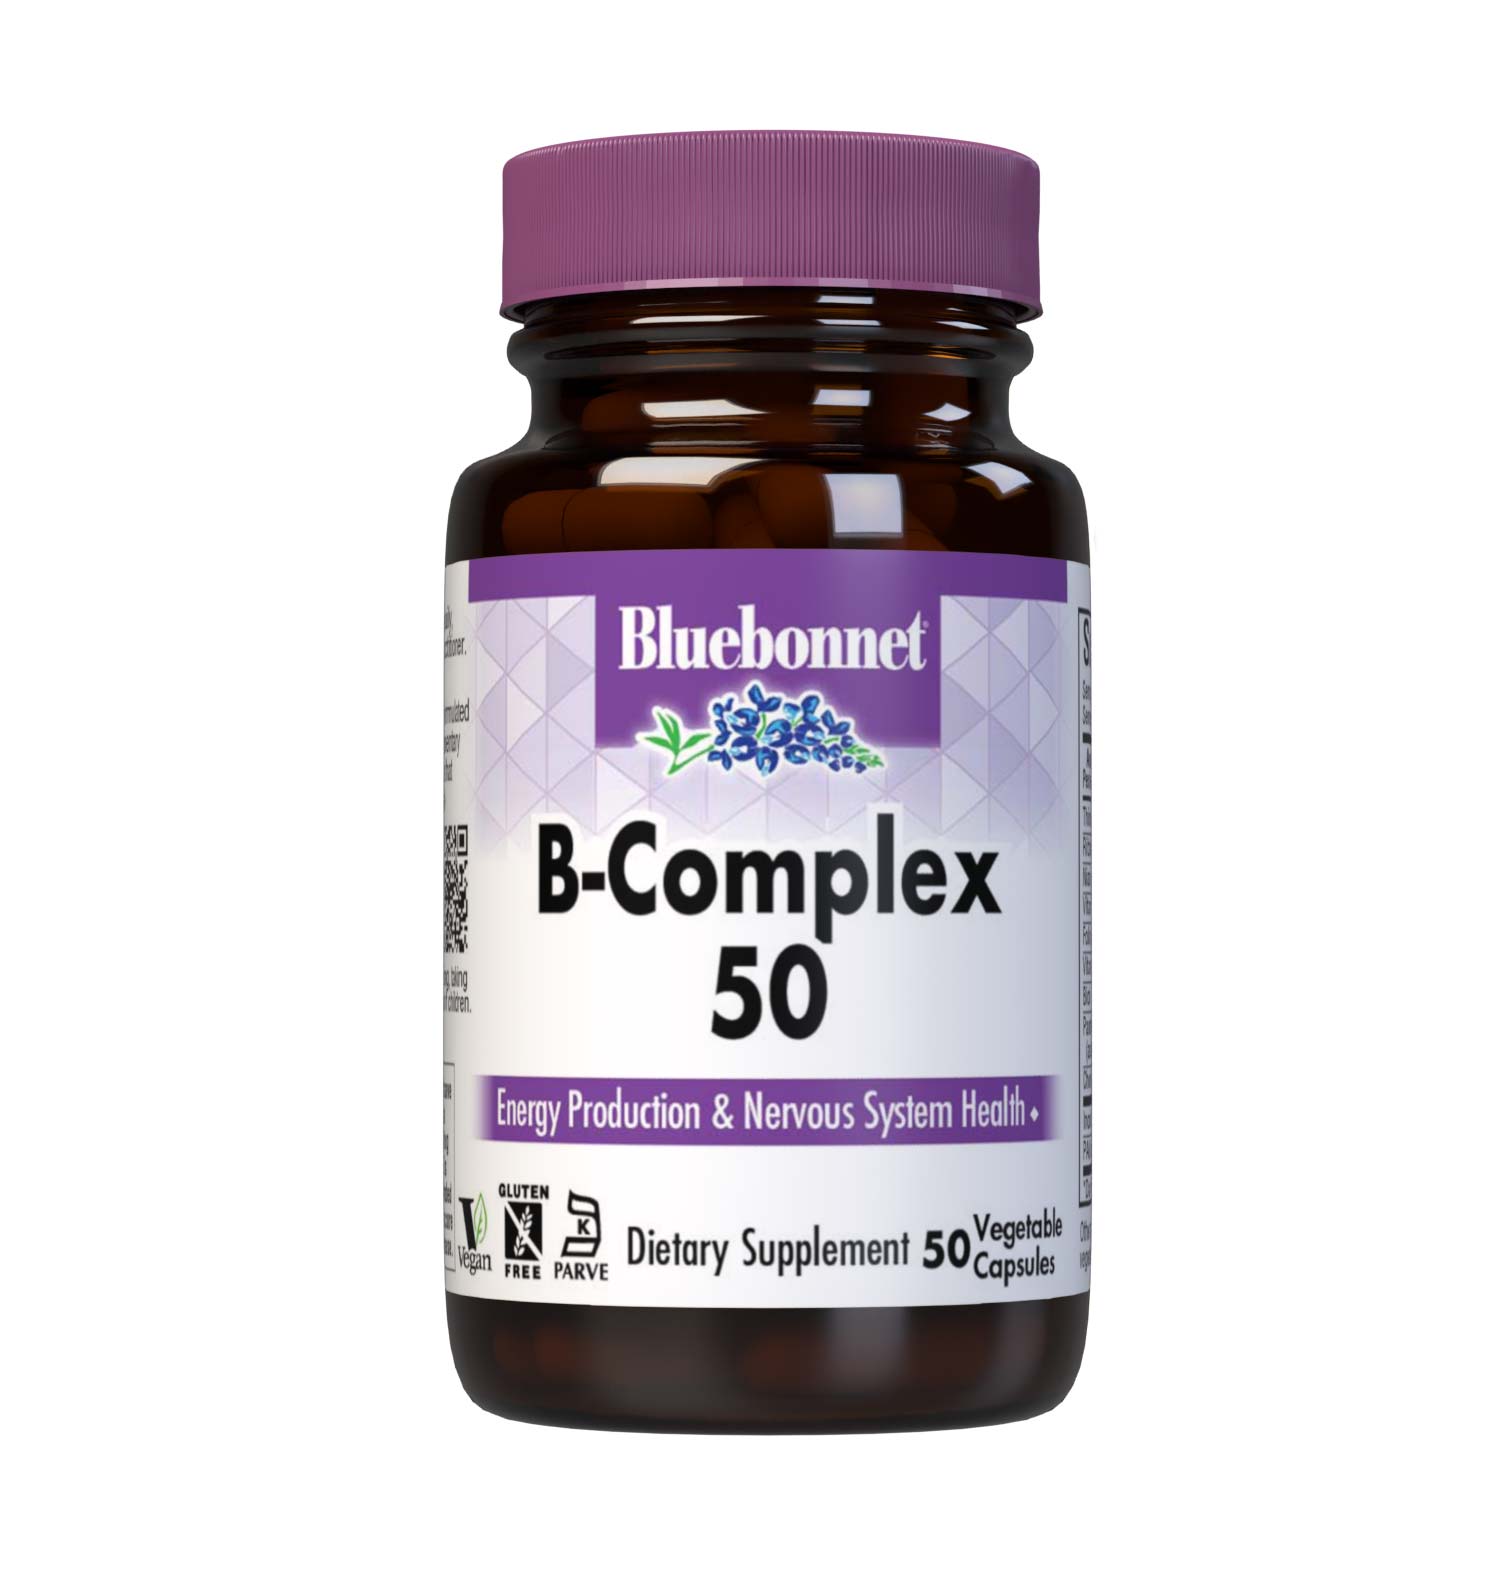 Bluebonnet’s B-Complex 50 Vegetable Capsules are formulated with a full spectrum of B vitamins which play a complementary role in maintaining physiologic and metabolic functions that support energy production and nervous system health. #size_50 count